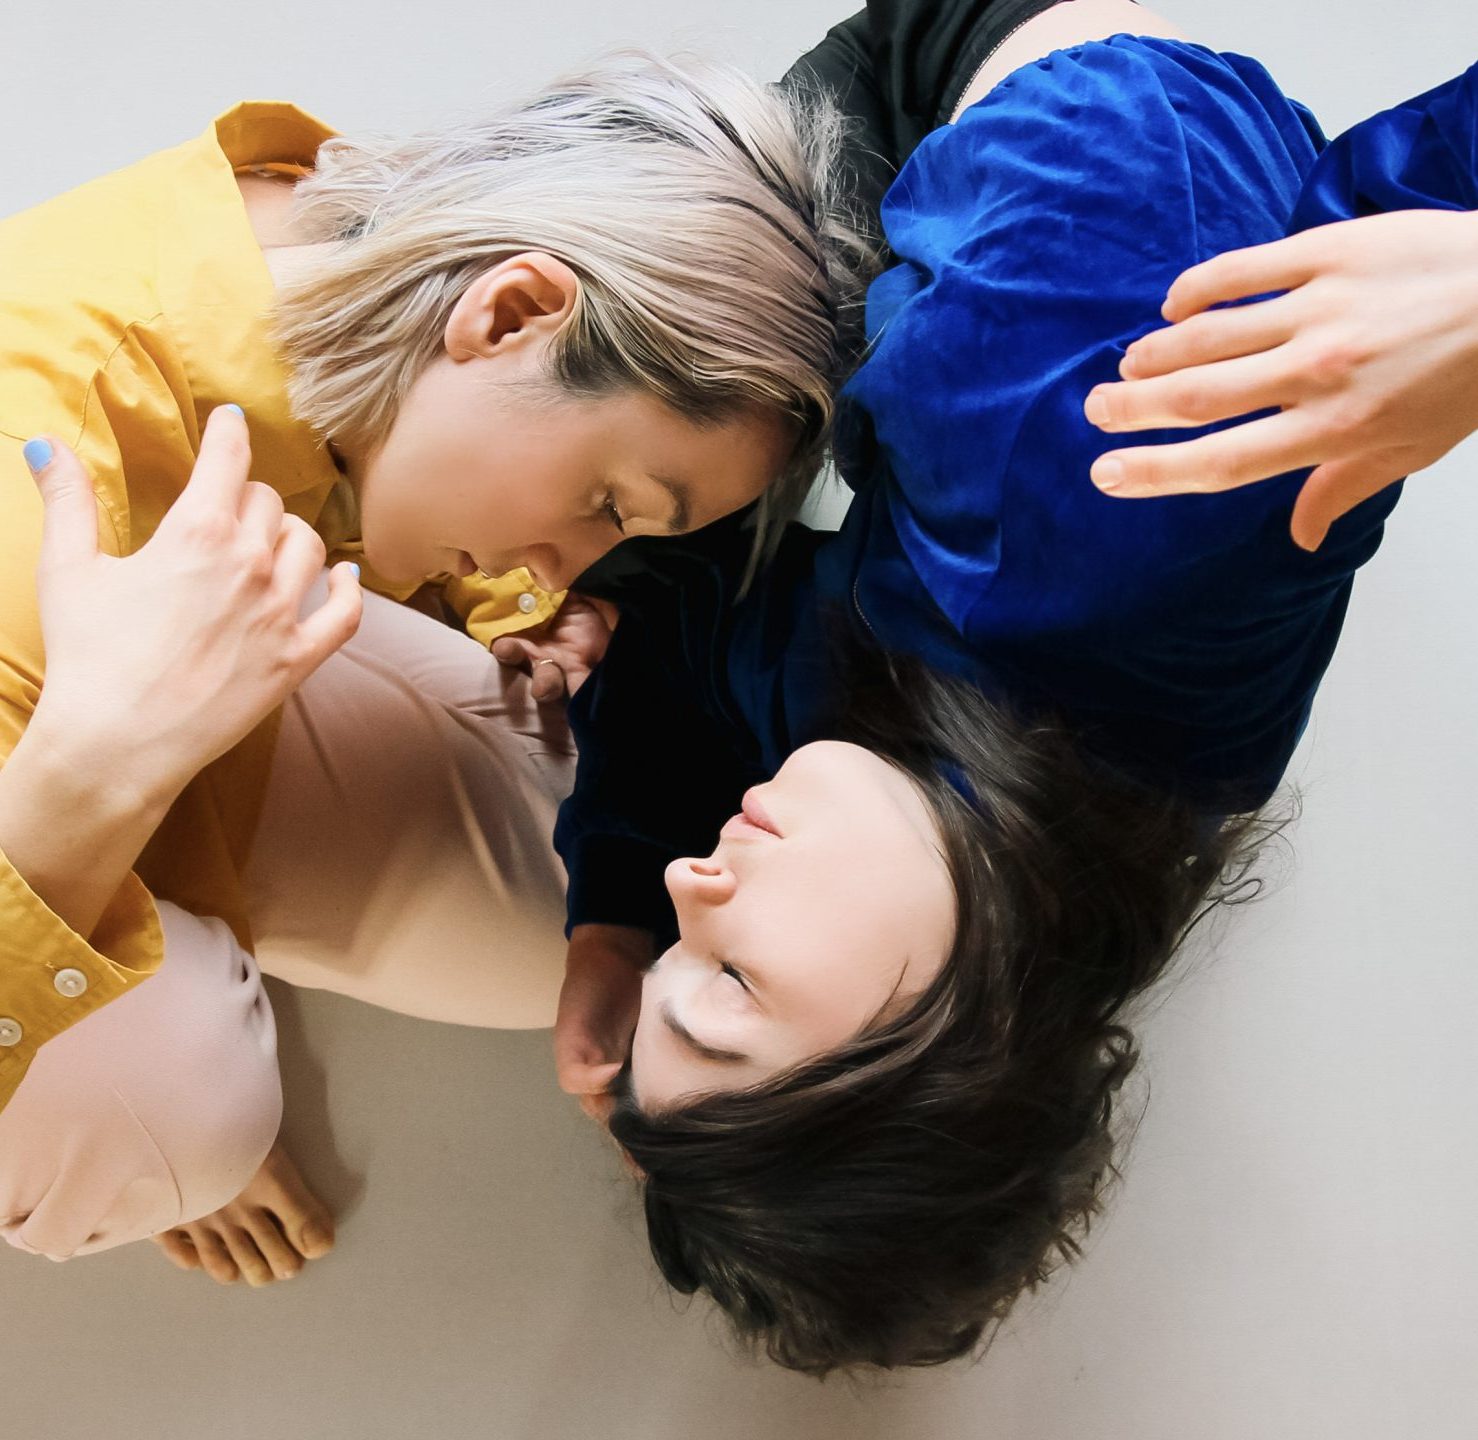 Two dance artists lean over with their heads towards each other. One is wearing a yellow shirt with blondeish hair and the other is wearing a blue shirt and has brown hair.